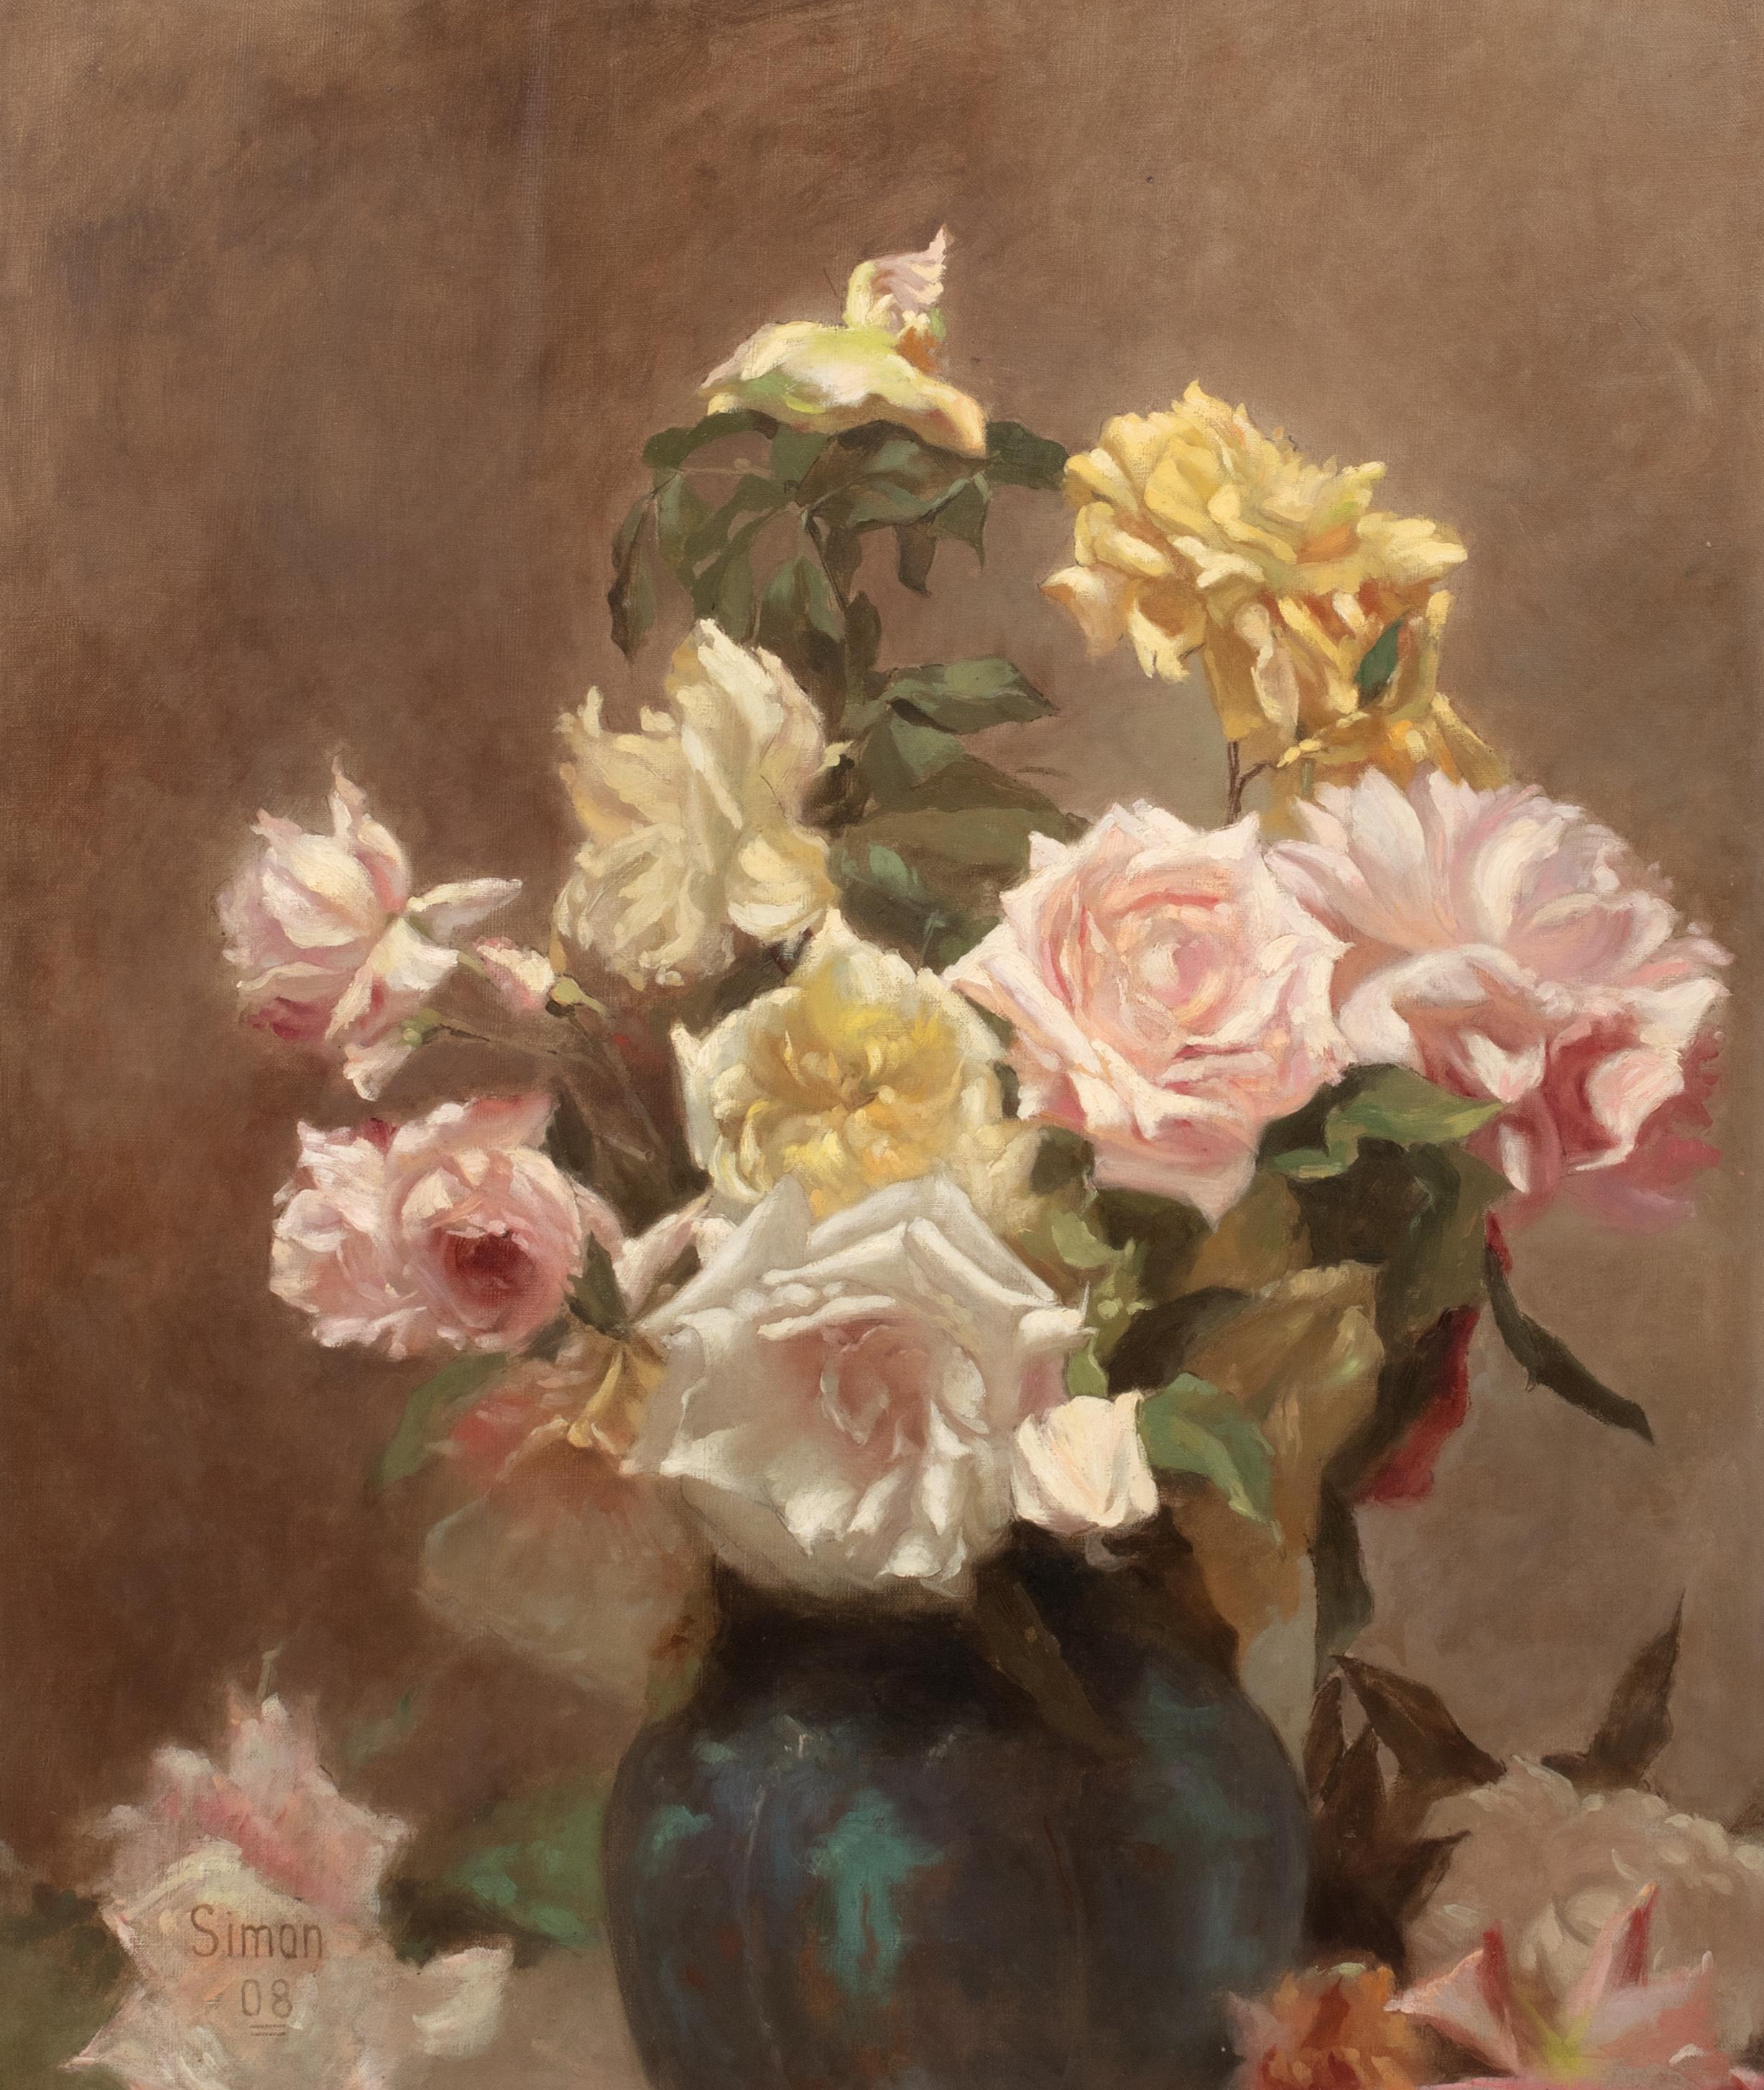 Still Life Of Summer Roses, dated 1908 

by LUCIEN SIMON (1861-1905) sales to $70,000

Large 1908 French Impressionist still life of yellow, pink and white summer roses in a vase, oil on canvas by Lucien Simon. Excellent quality and condition,